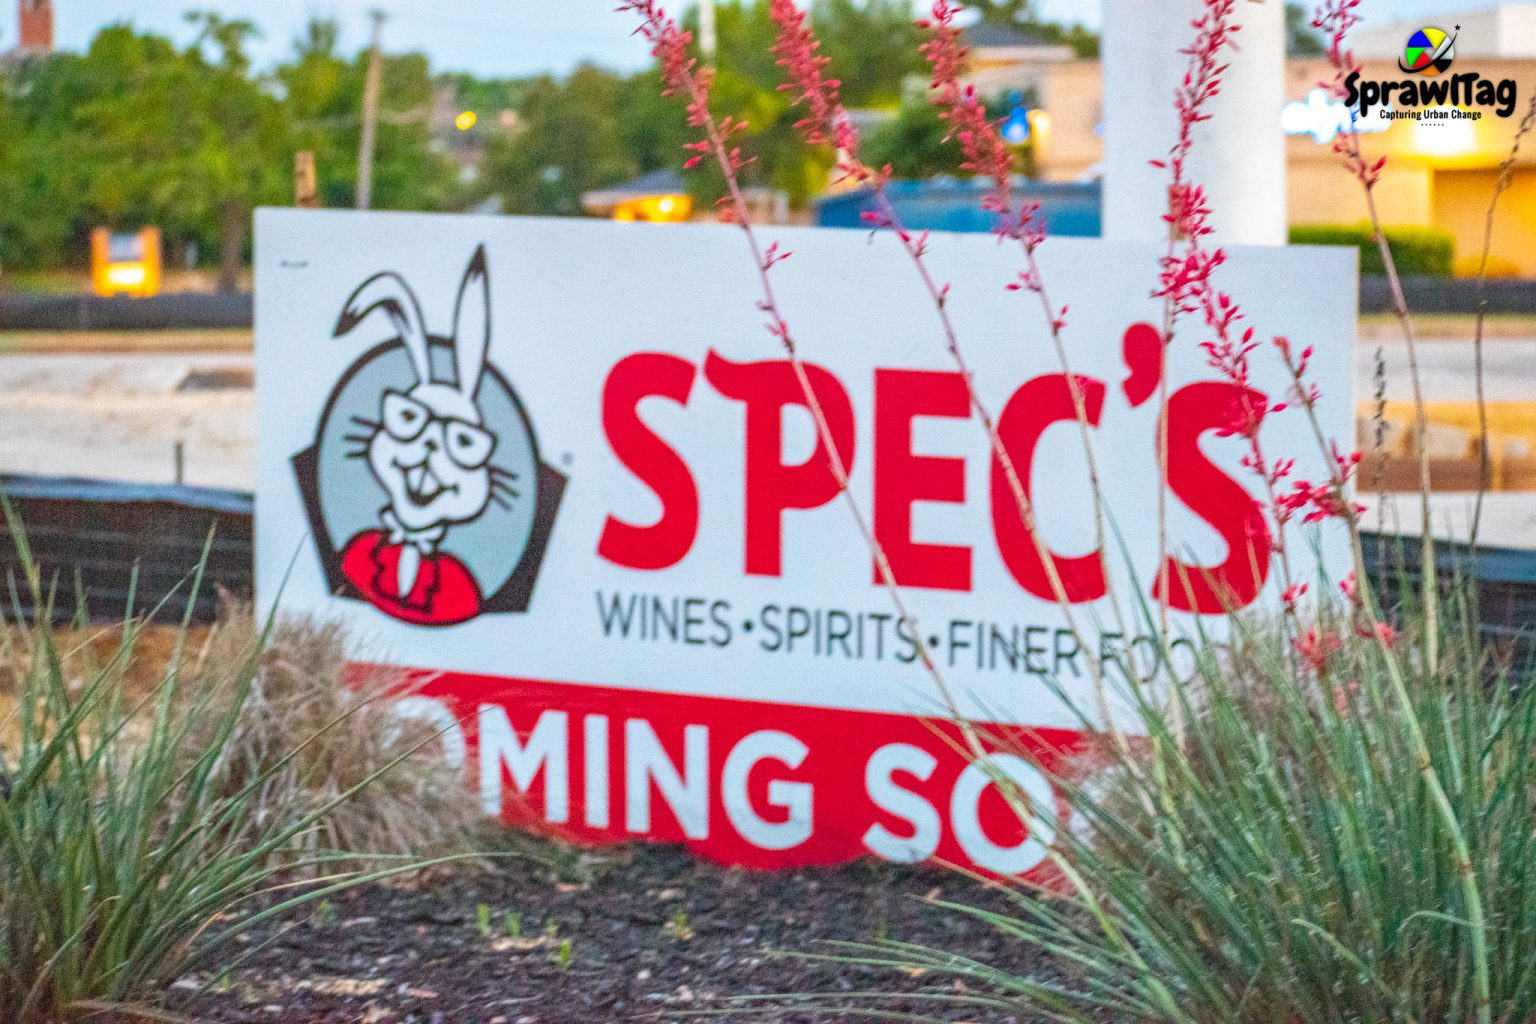 Specs coming soon sign in Bedford Texas.